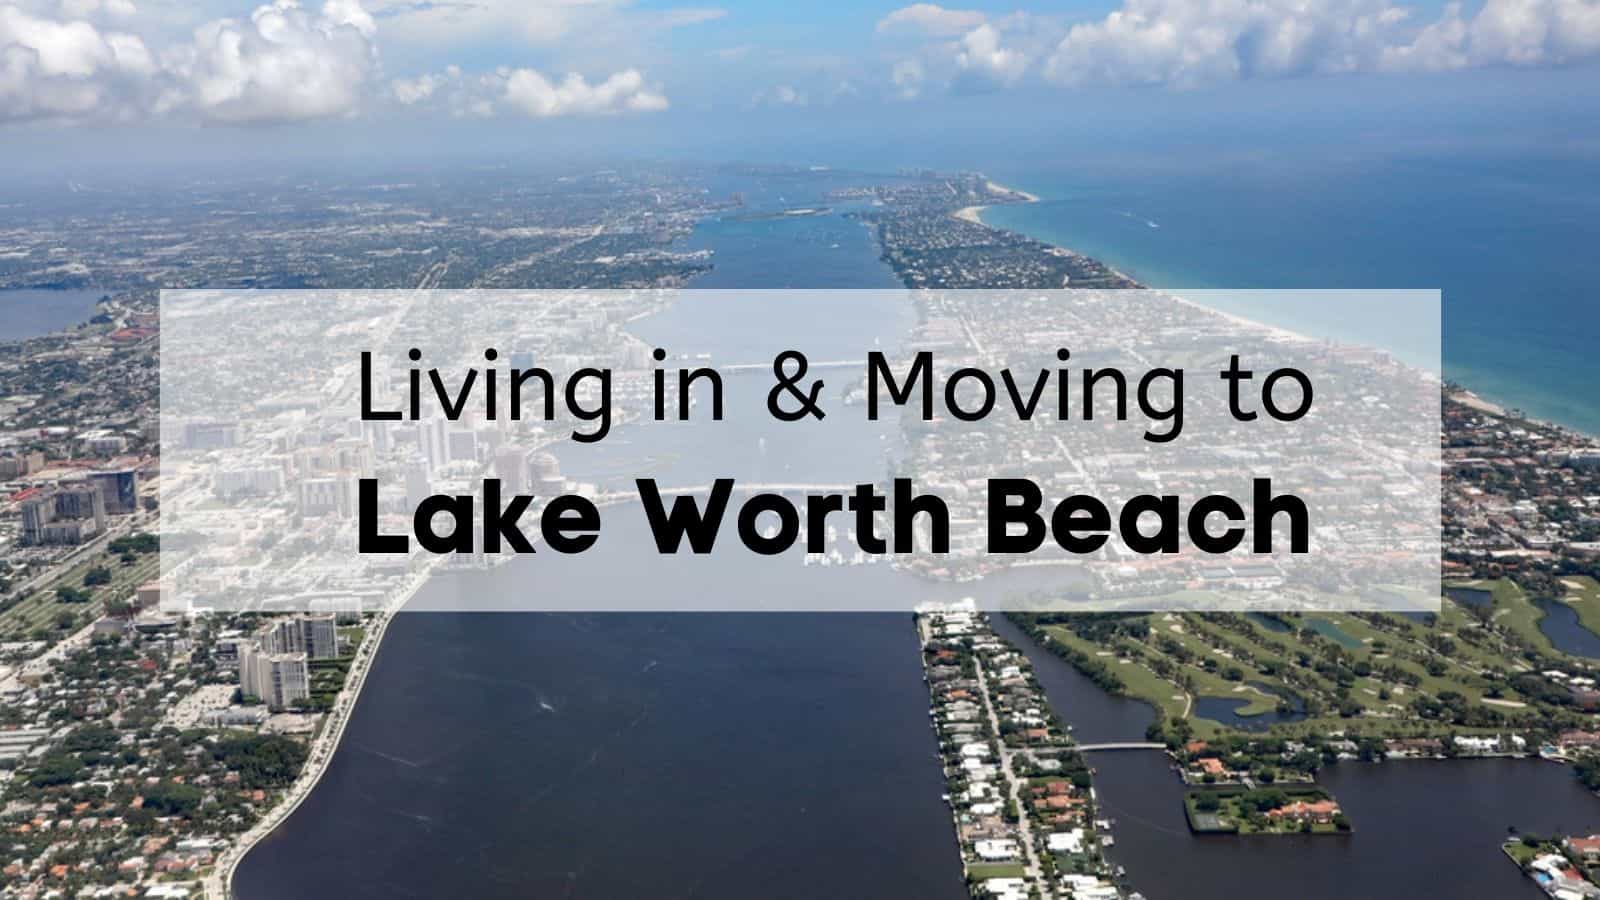 Living in & Moving to Lake Worth Beach